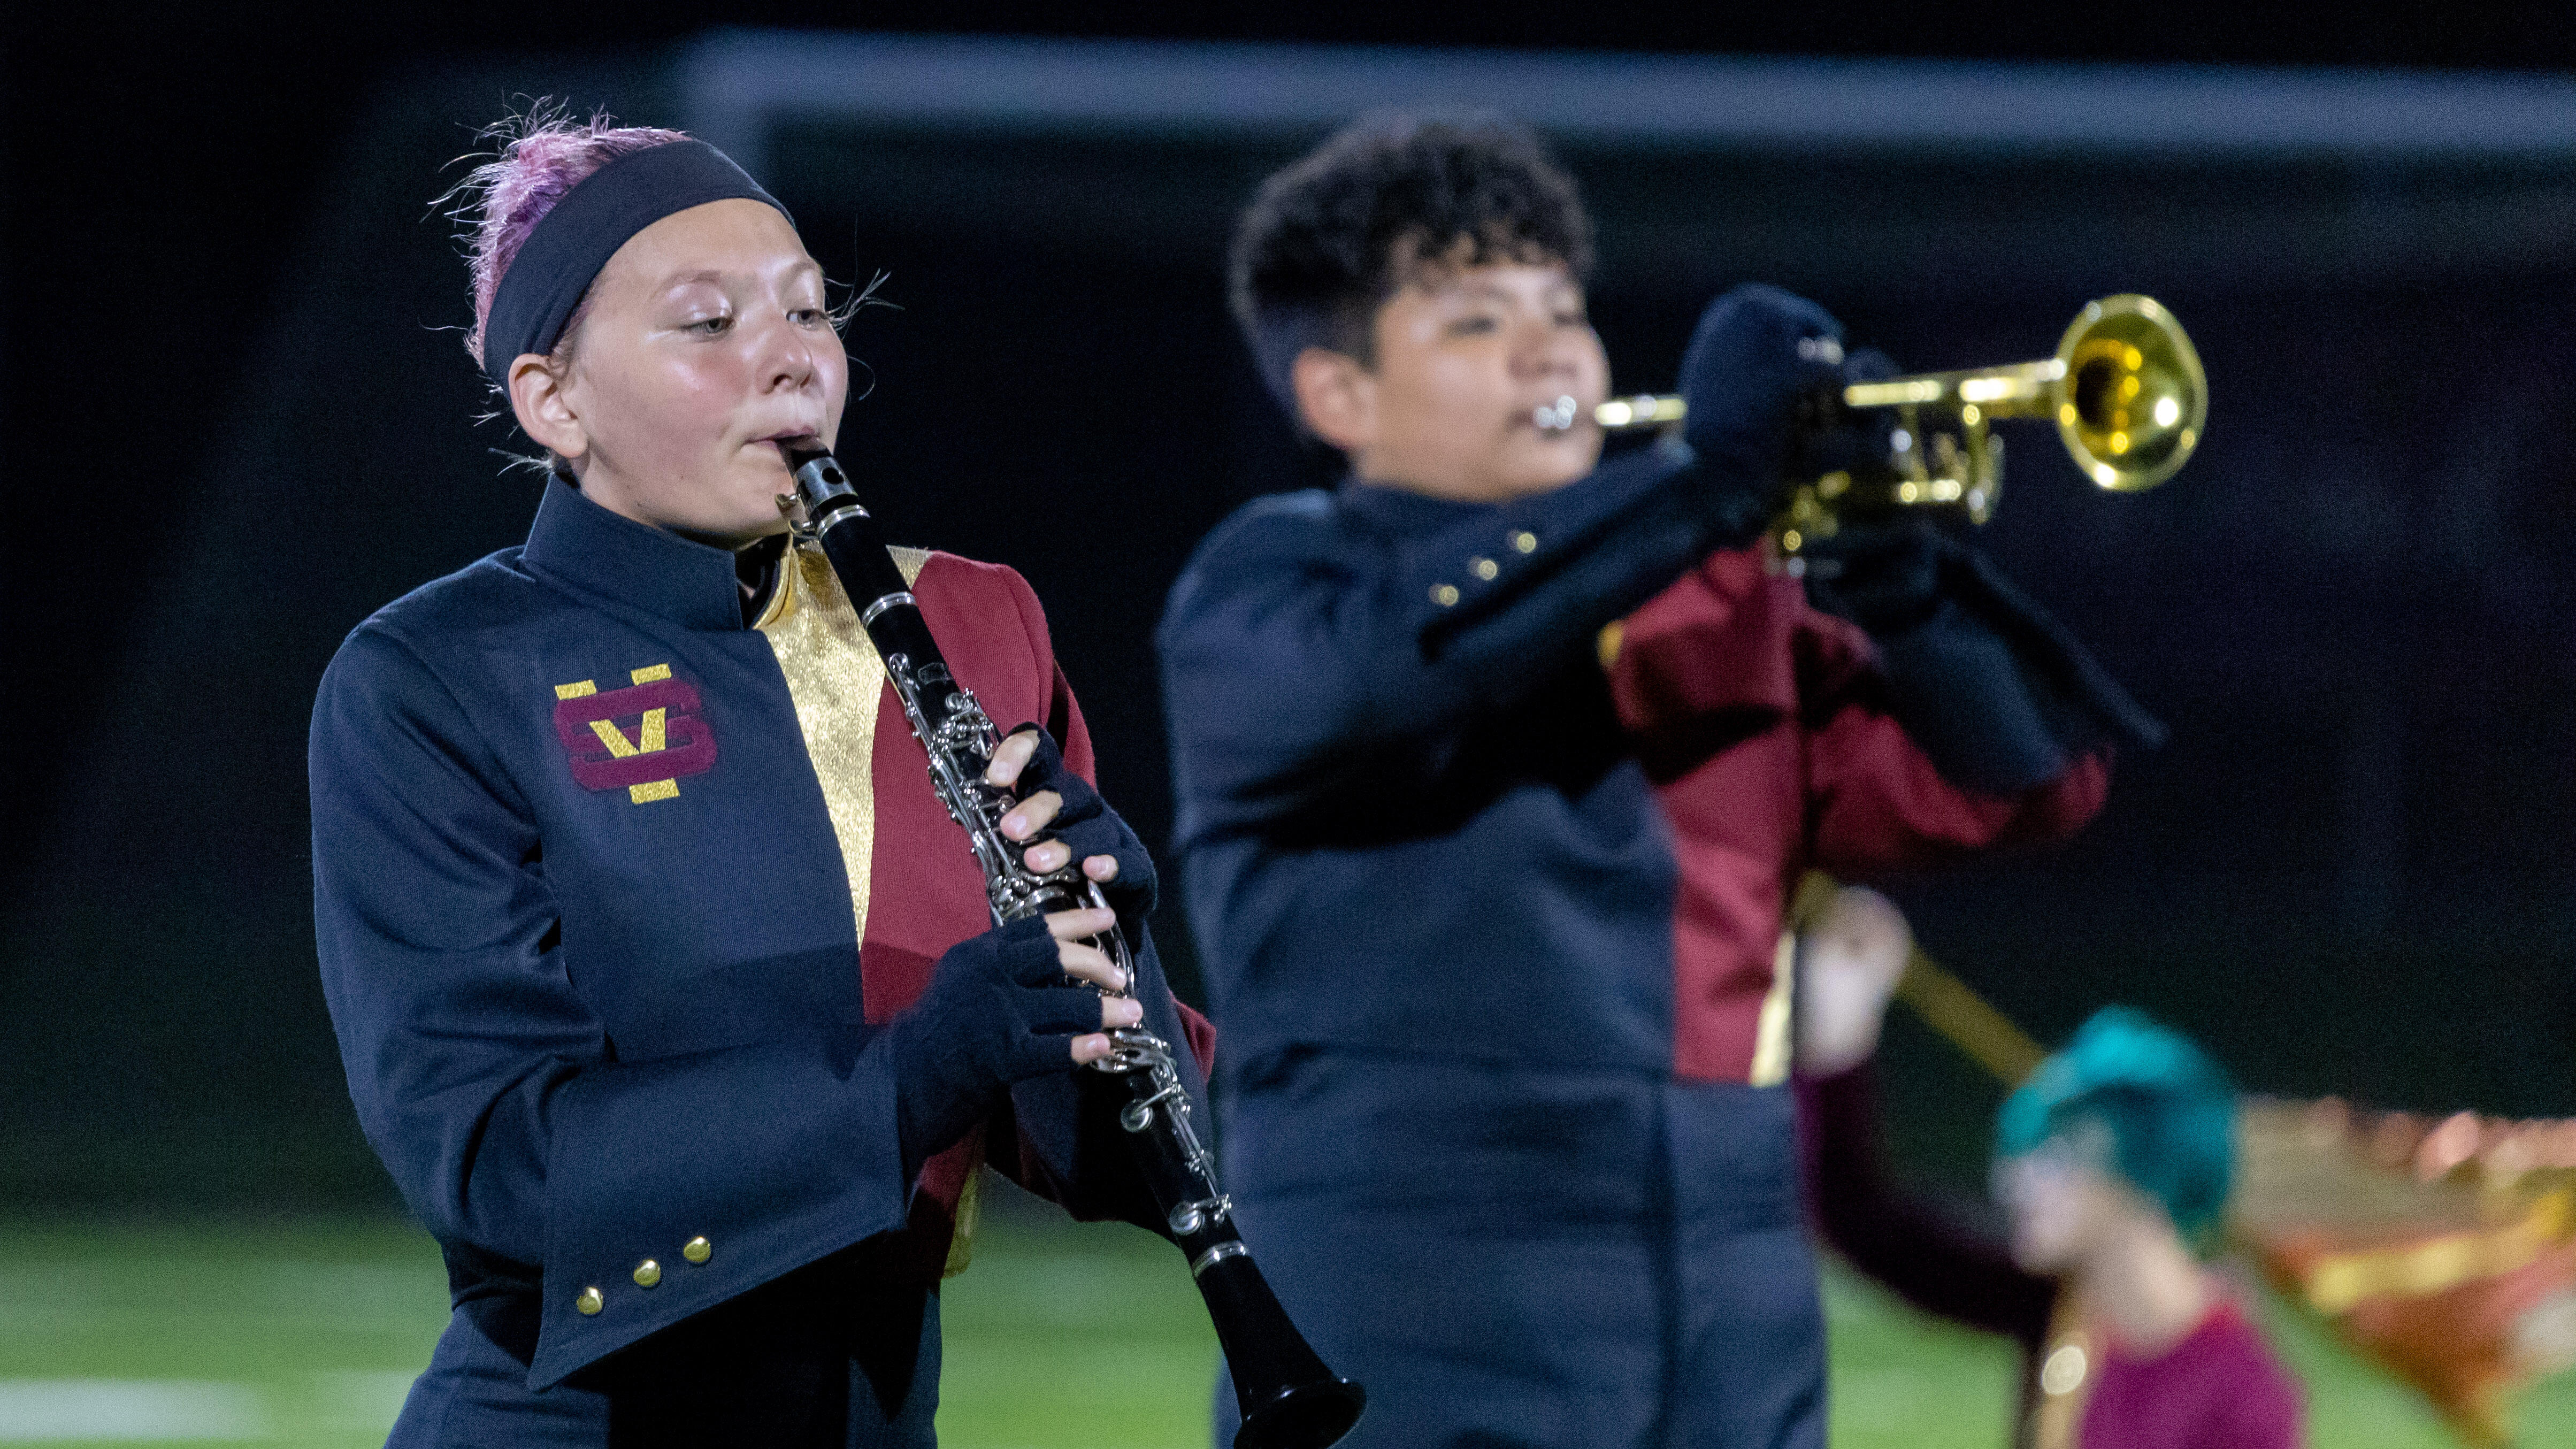 The Steel Valley Marching Band performs during halftime of a football game. Clarinet player Loki Brown is in the foreground.